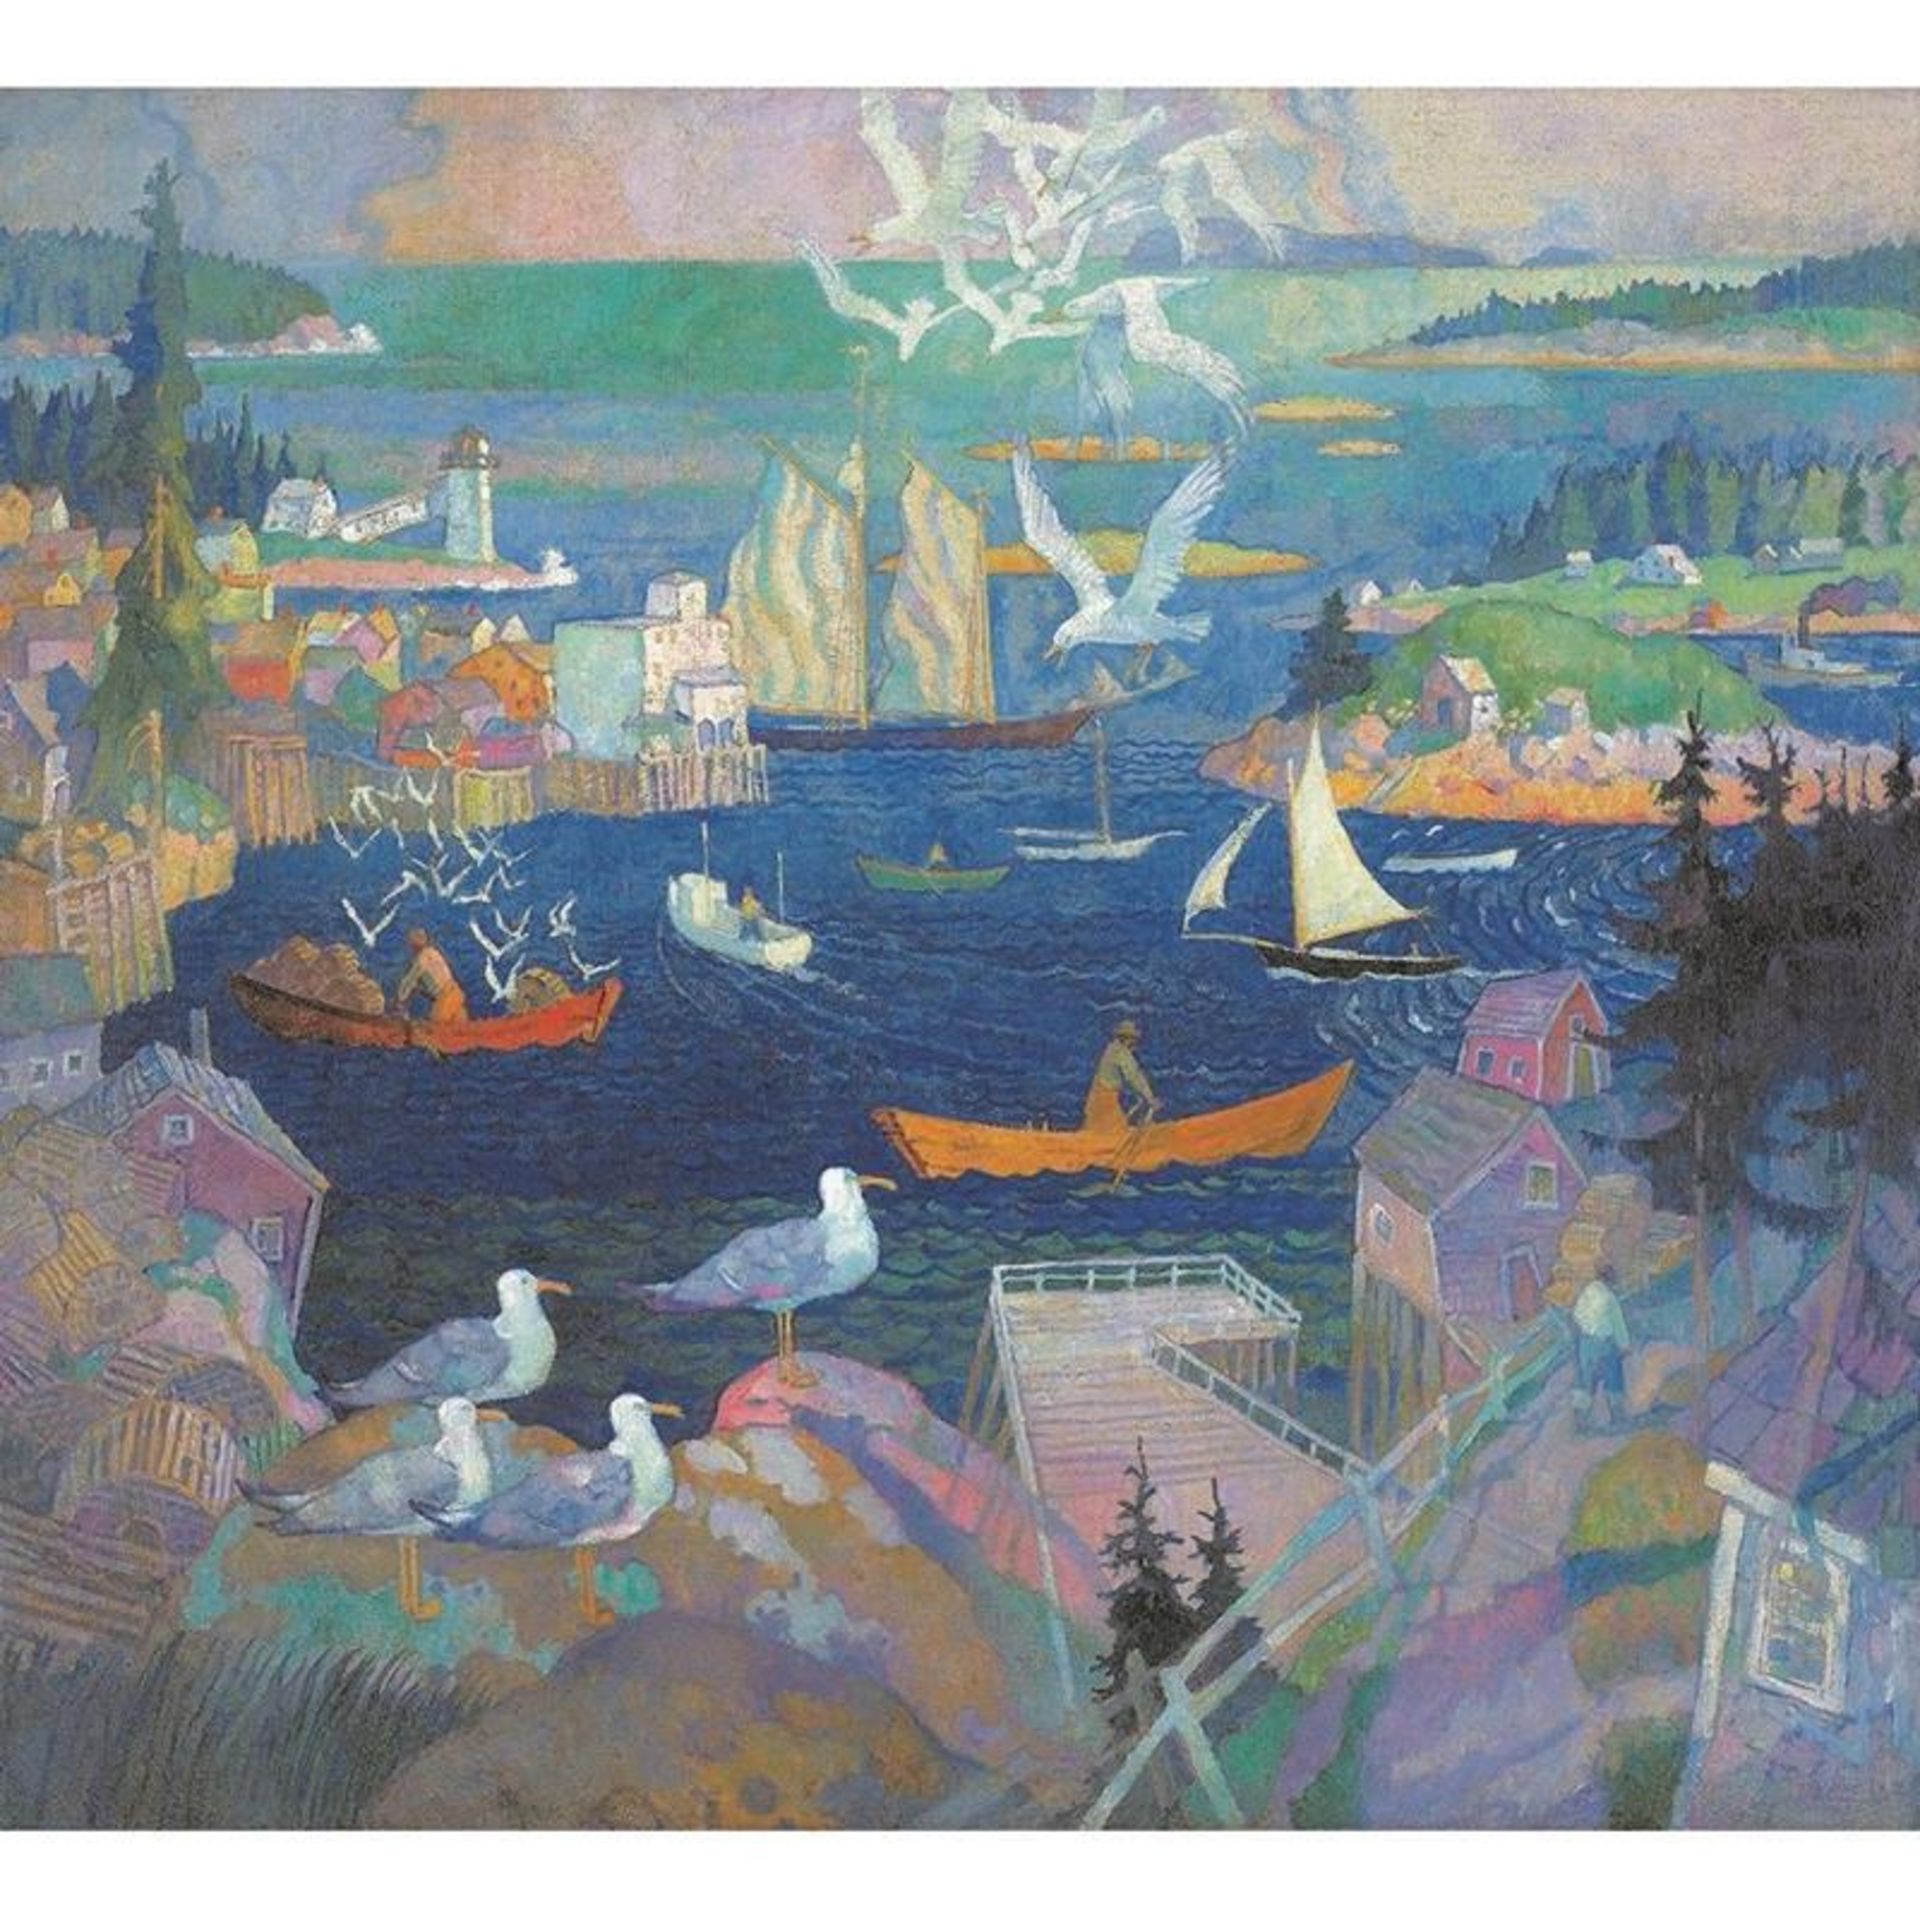 N.C. Wyeth "Harbor at Herring Gut, 1925" Offset Lithograph - Image 2 of 2